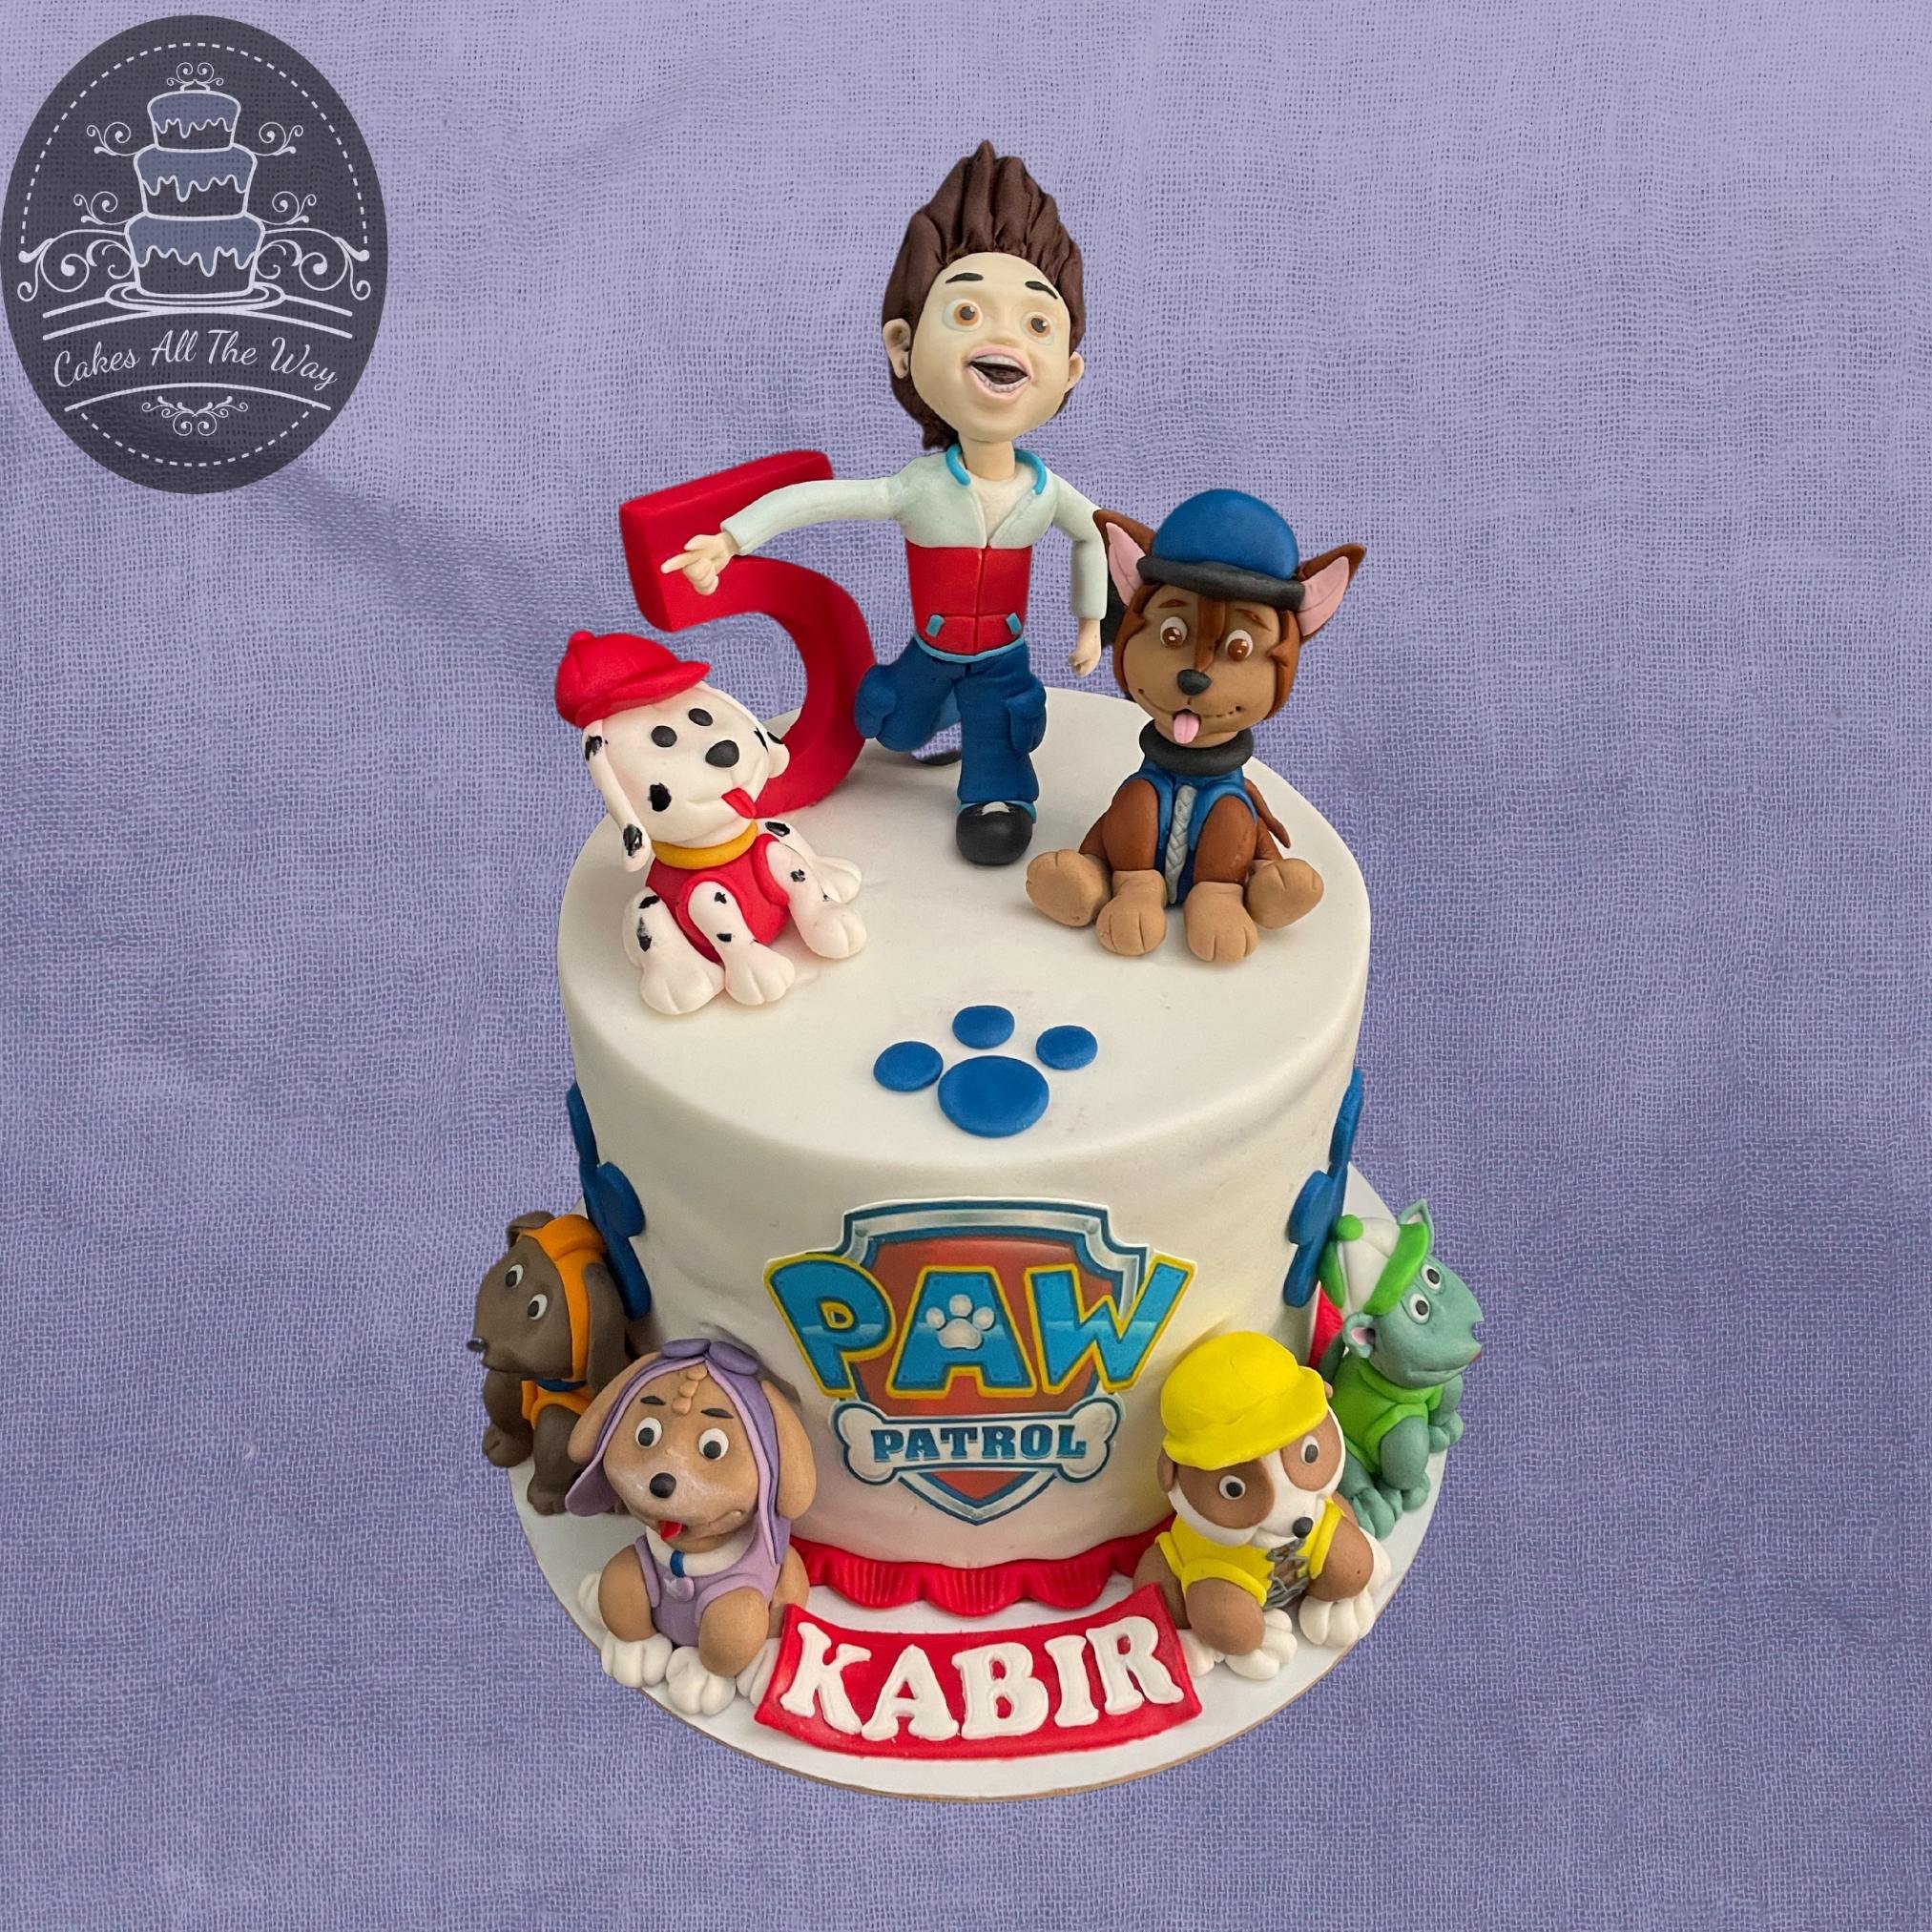 Paw Patrol Theme Cake, Online Delivery In Delhi, Noida, Gurgaon, Ghaziabad  – The Cake King